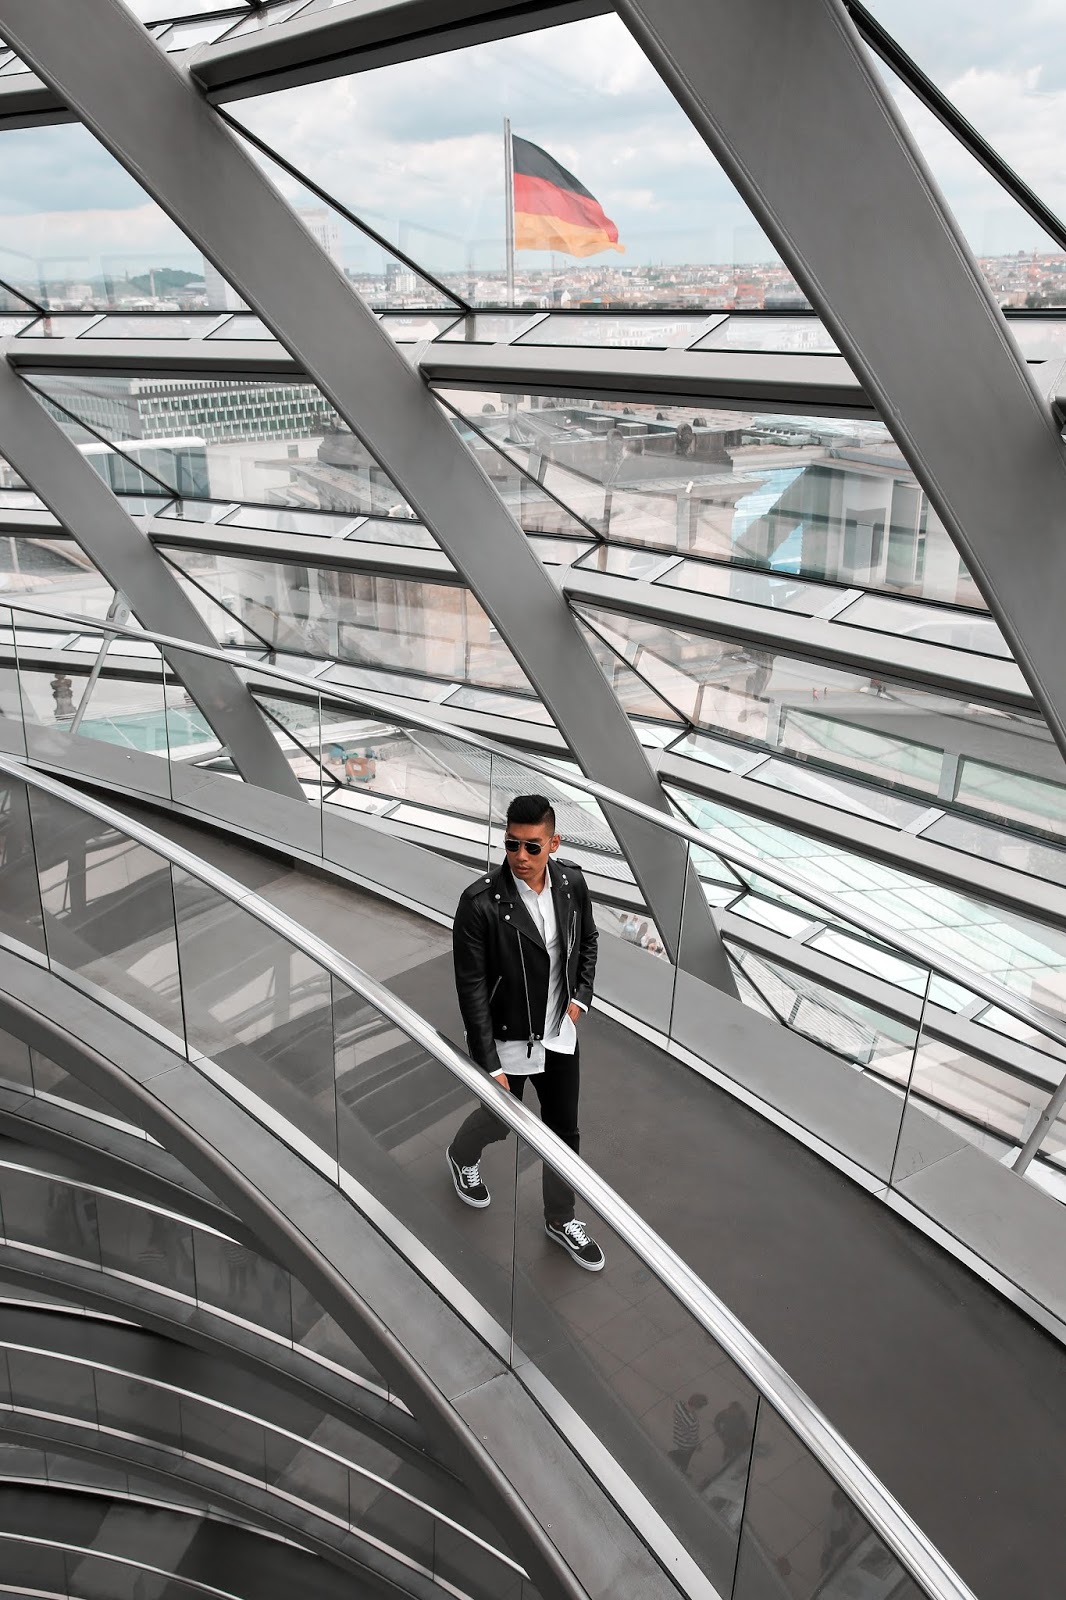 Leo Chan at The Reichstag Building Dome